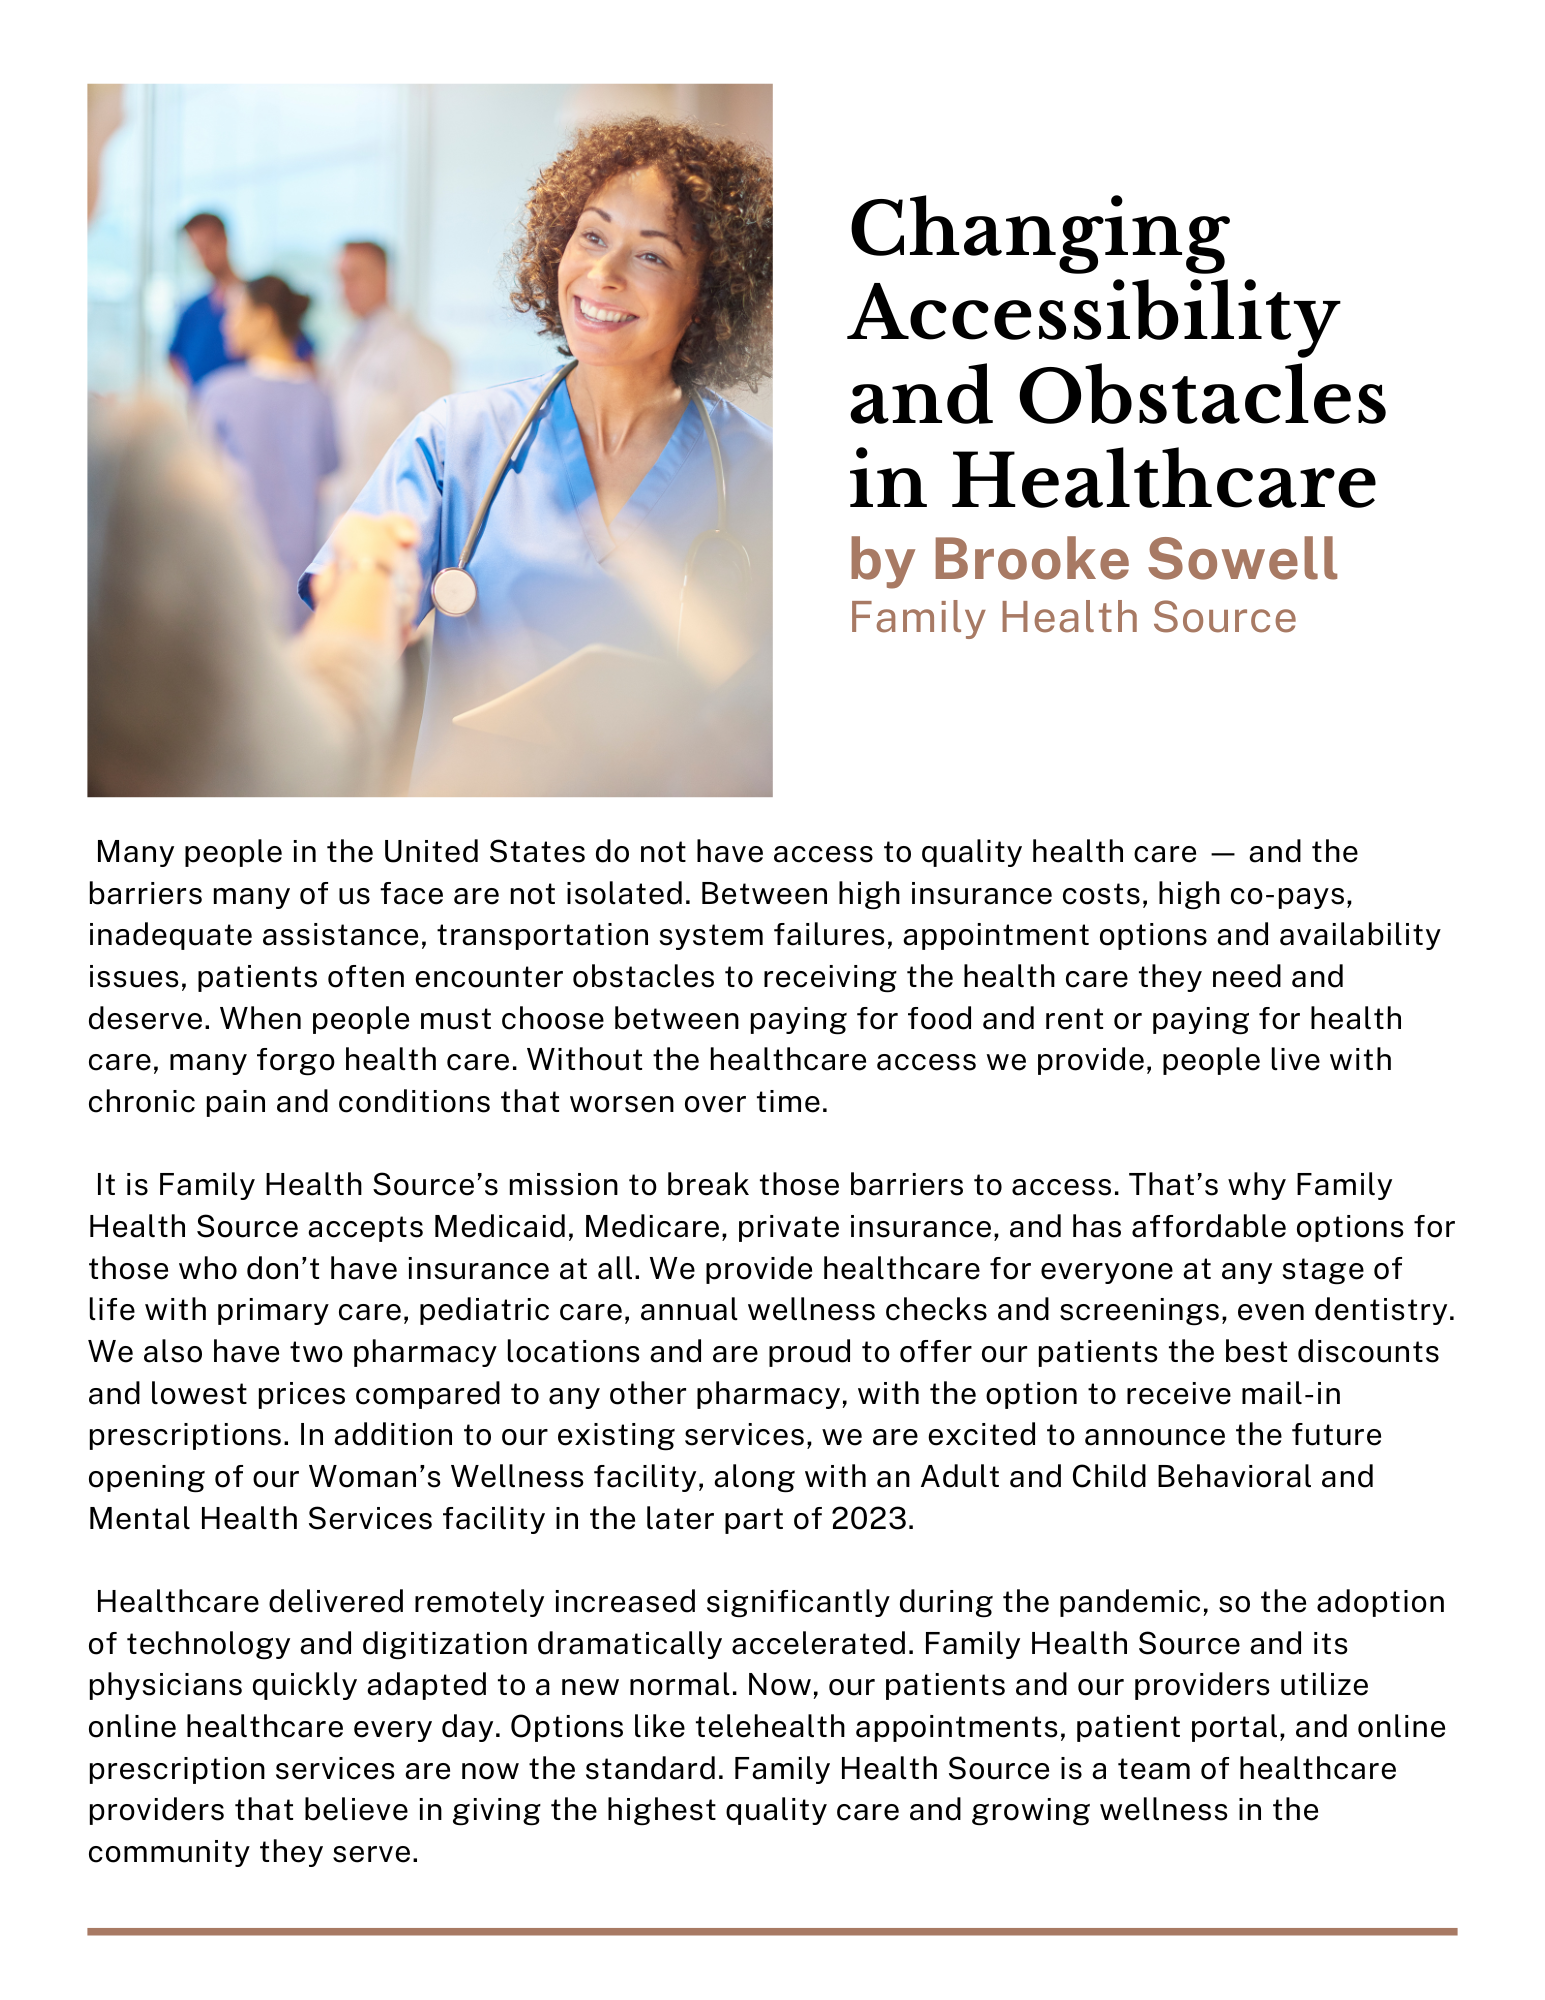 Changing Accessibility and Obstacles in Healthcare (English Version) (1)